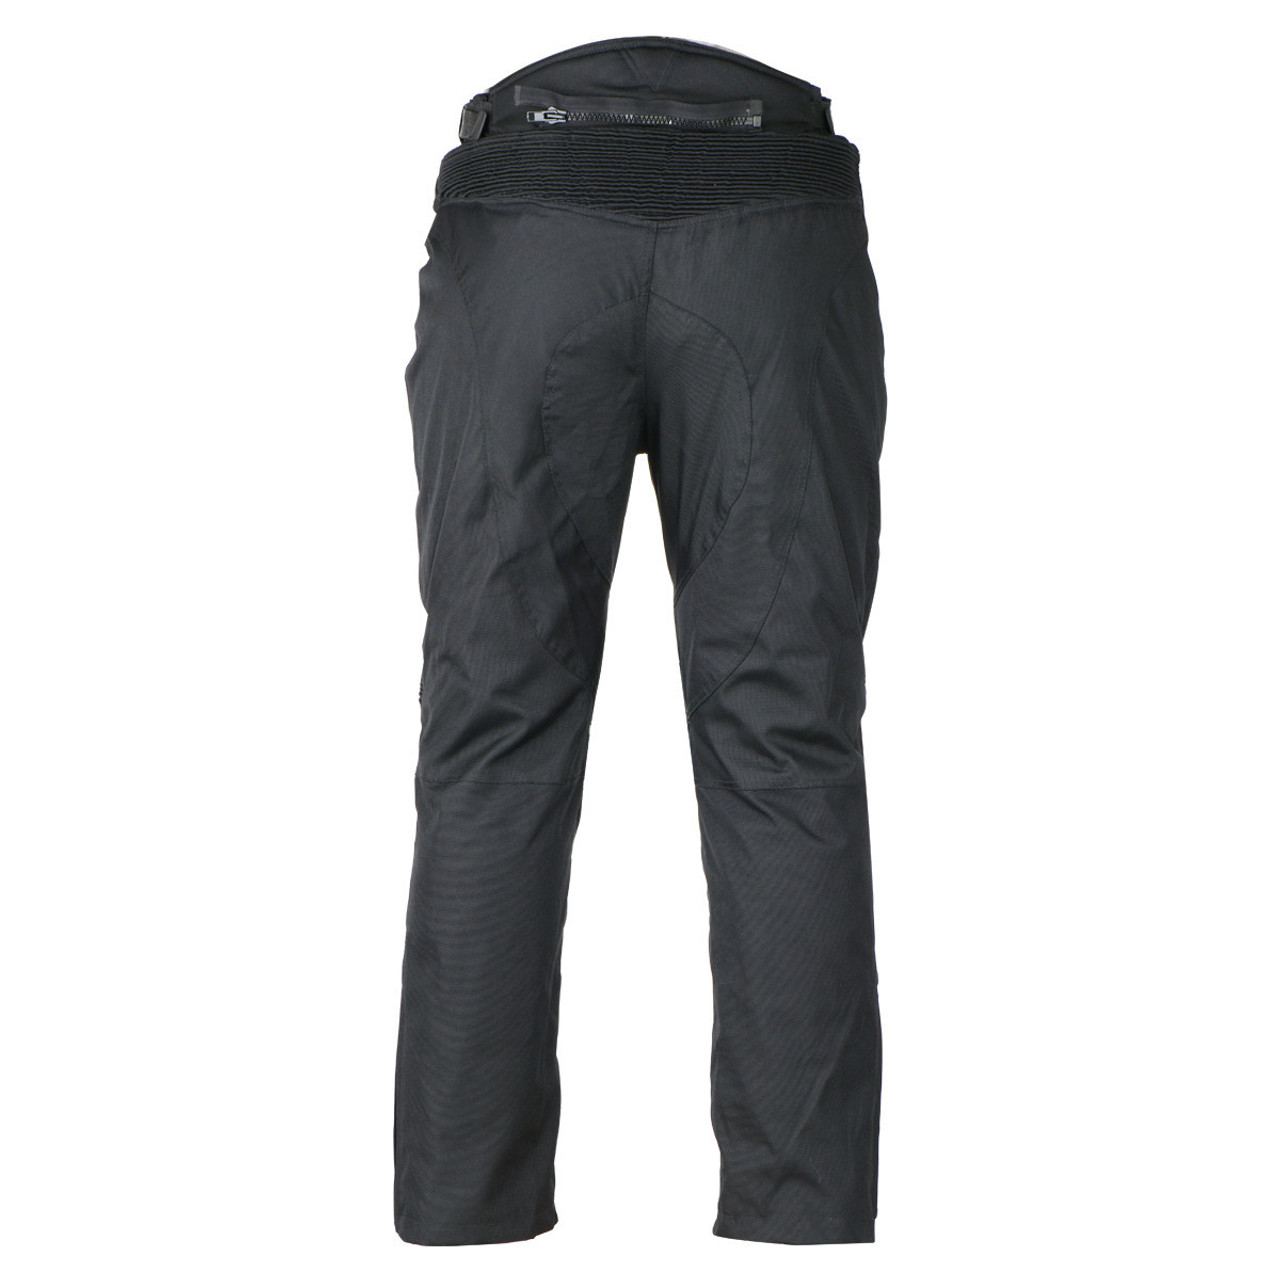 FEHER motorcycle riding pants quick-release quick-release pants